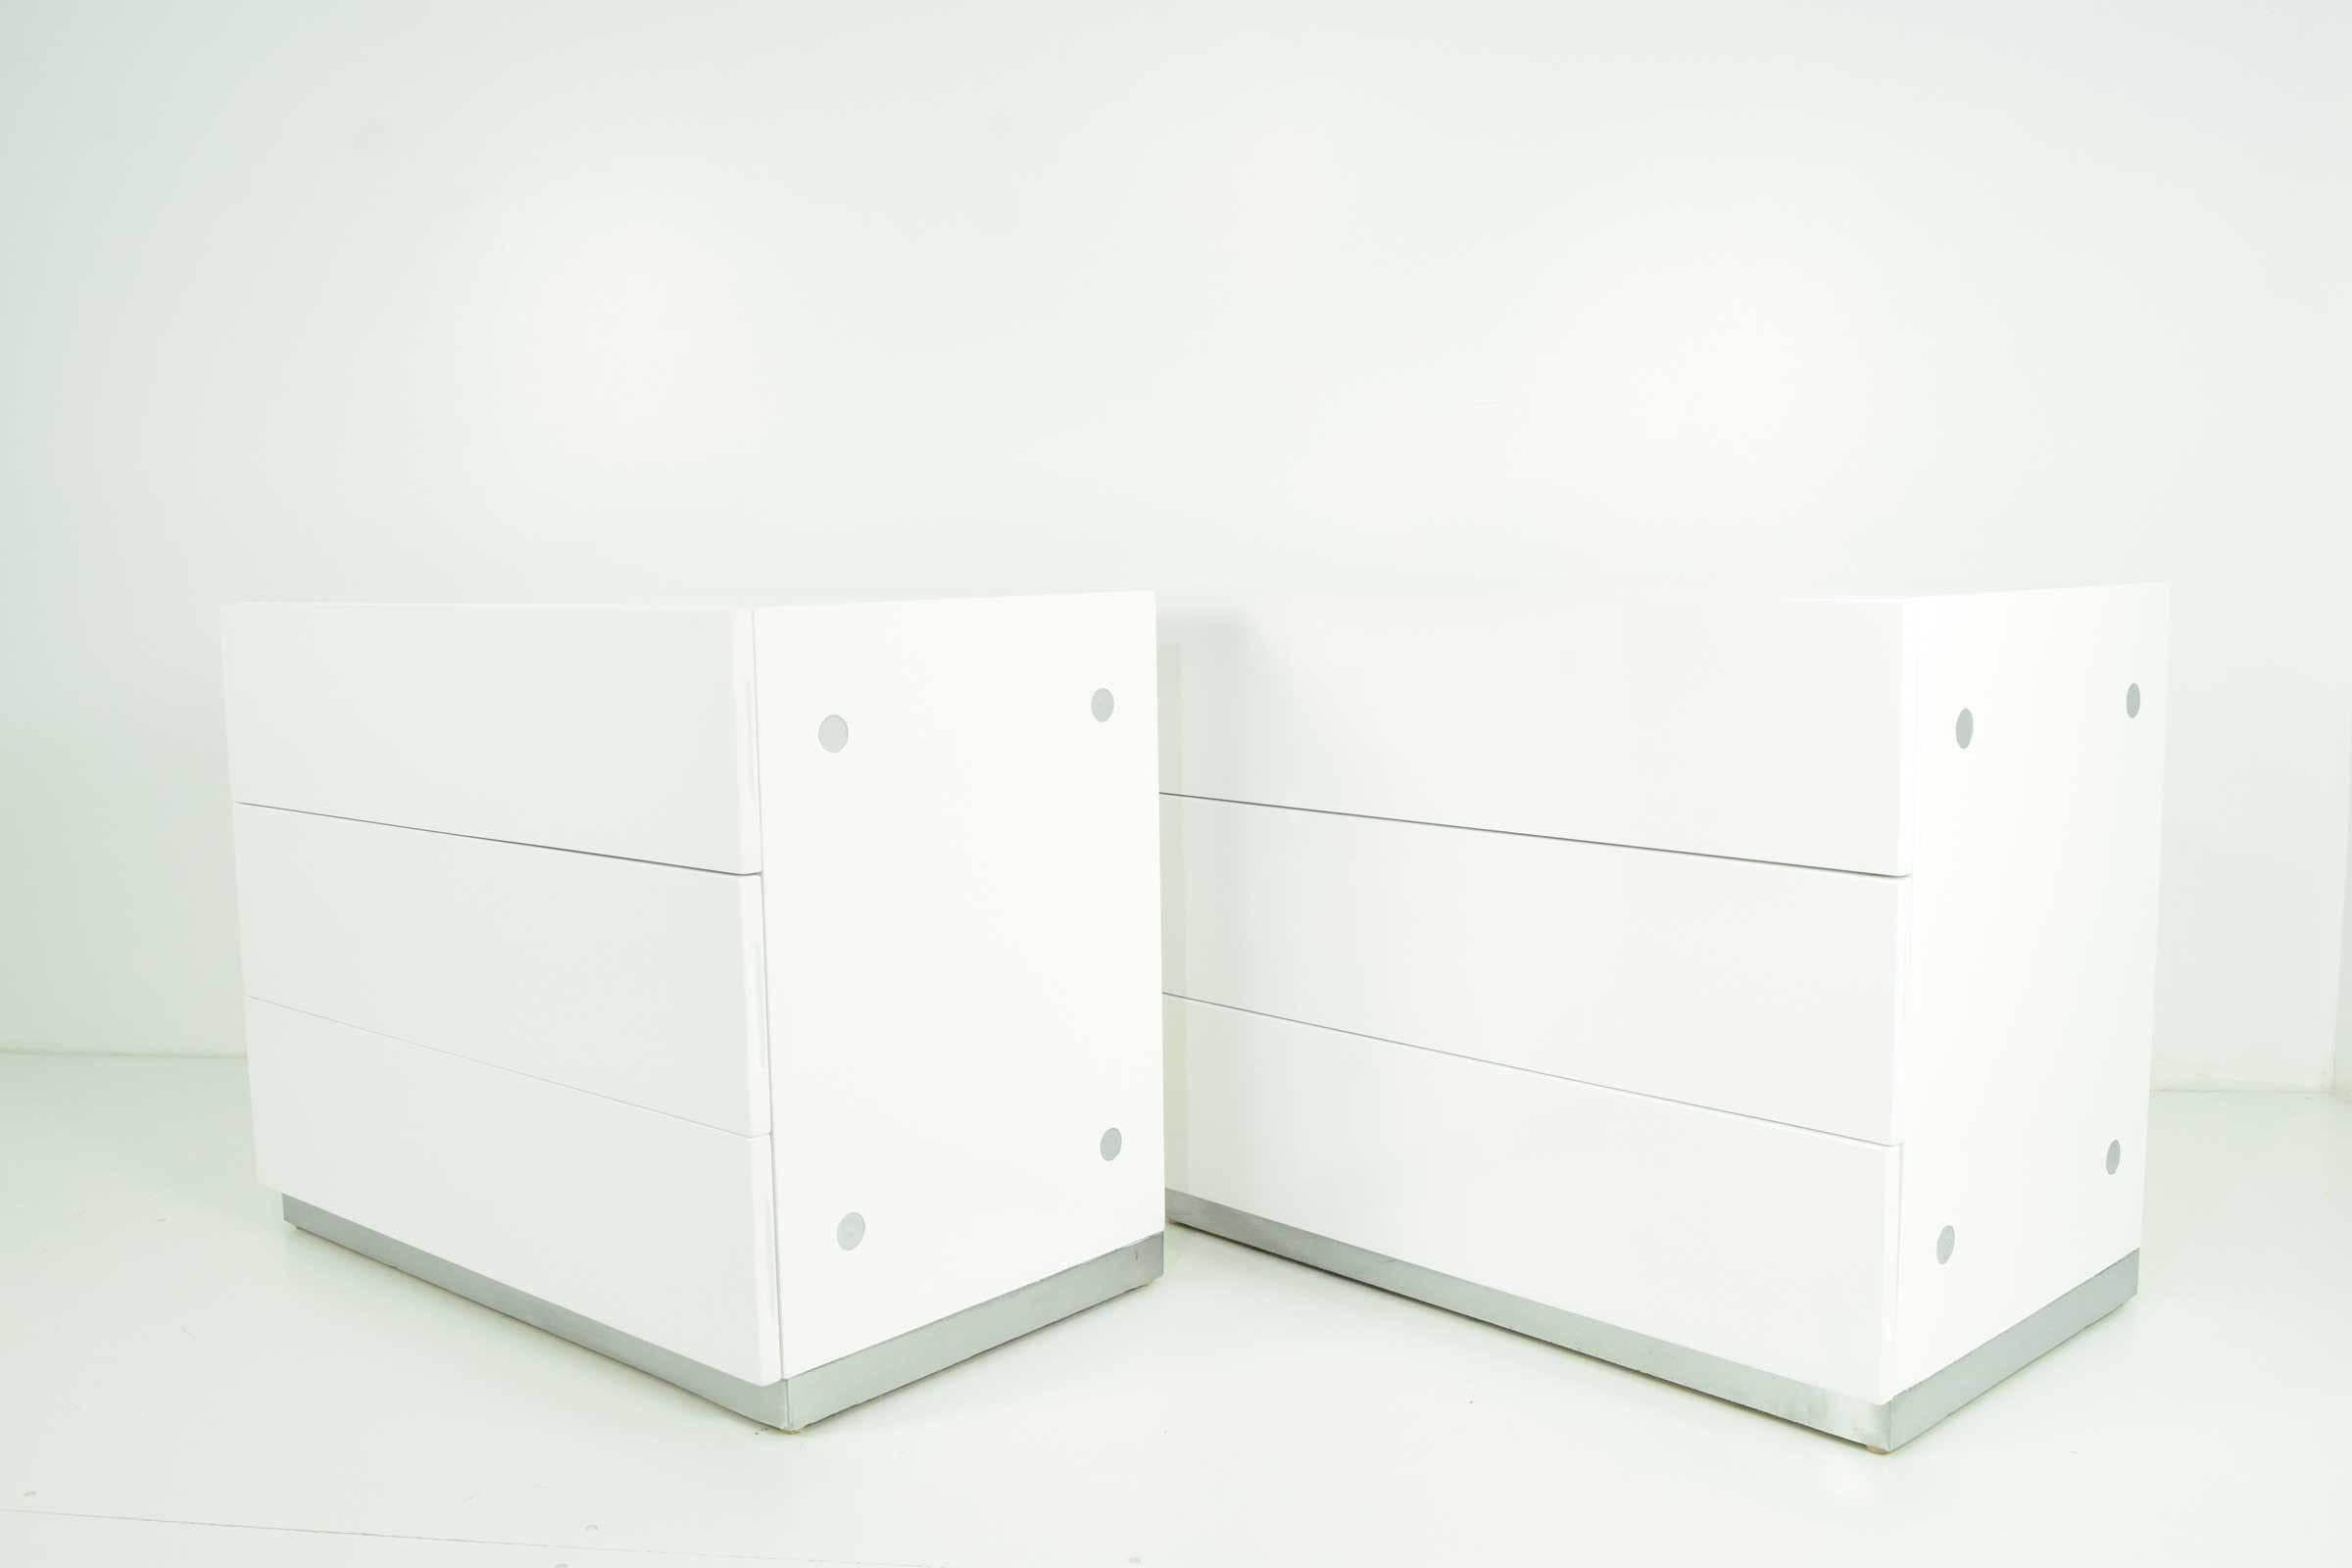 Beautifully restored, pair of white lacquer nightstands/chests by Milo Baughman for Thayer Coggin. Chest have three drawers each and chrome detailing on sides along with chrome trim base.